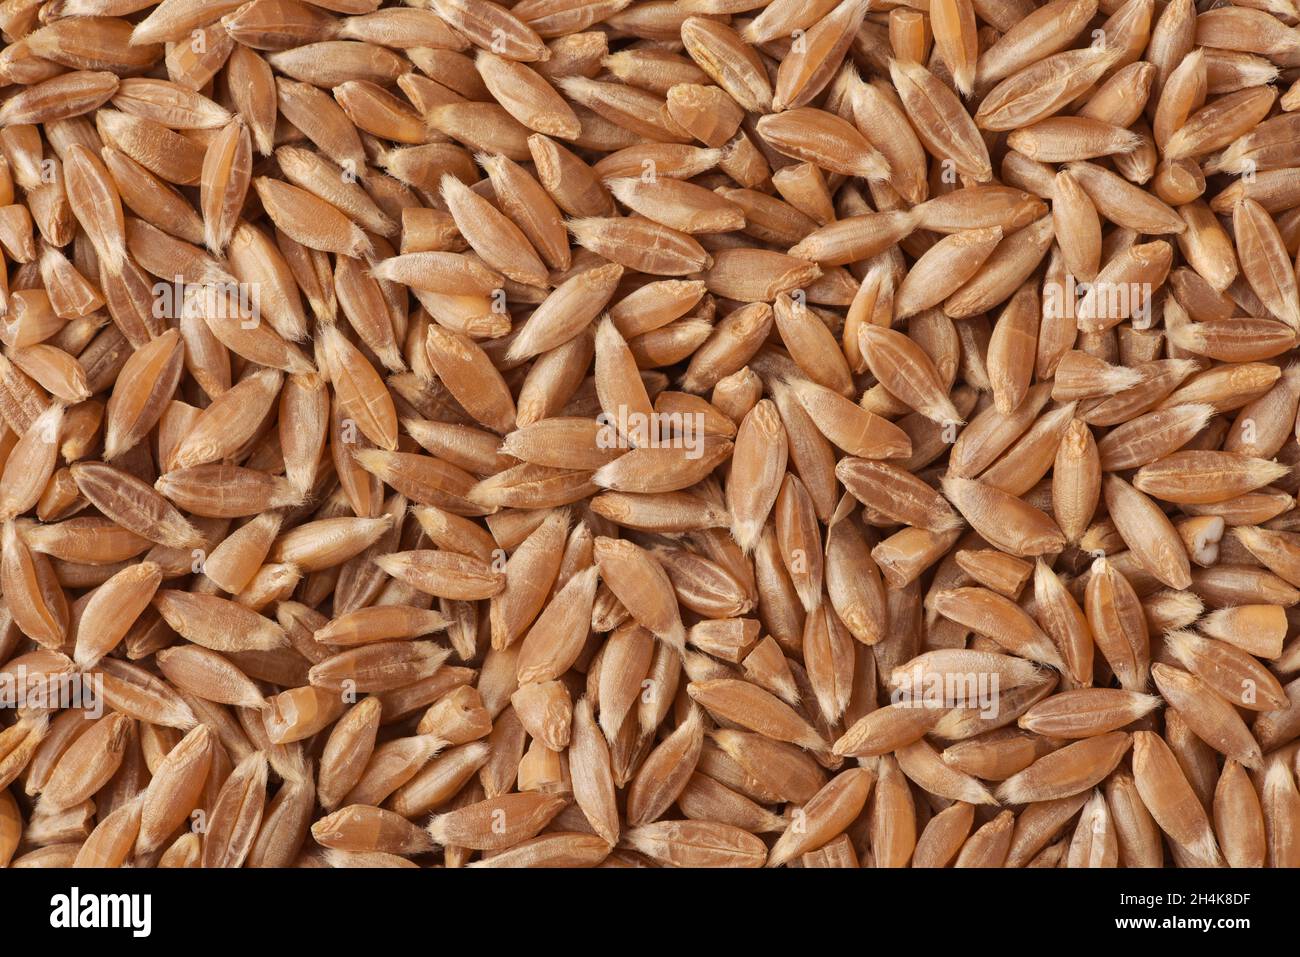 Top view of organic spelt wheat grains background Stock Photo